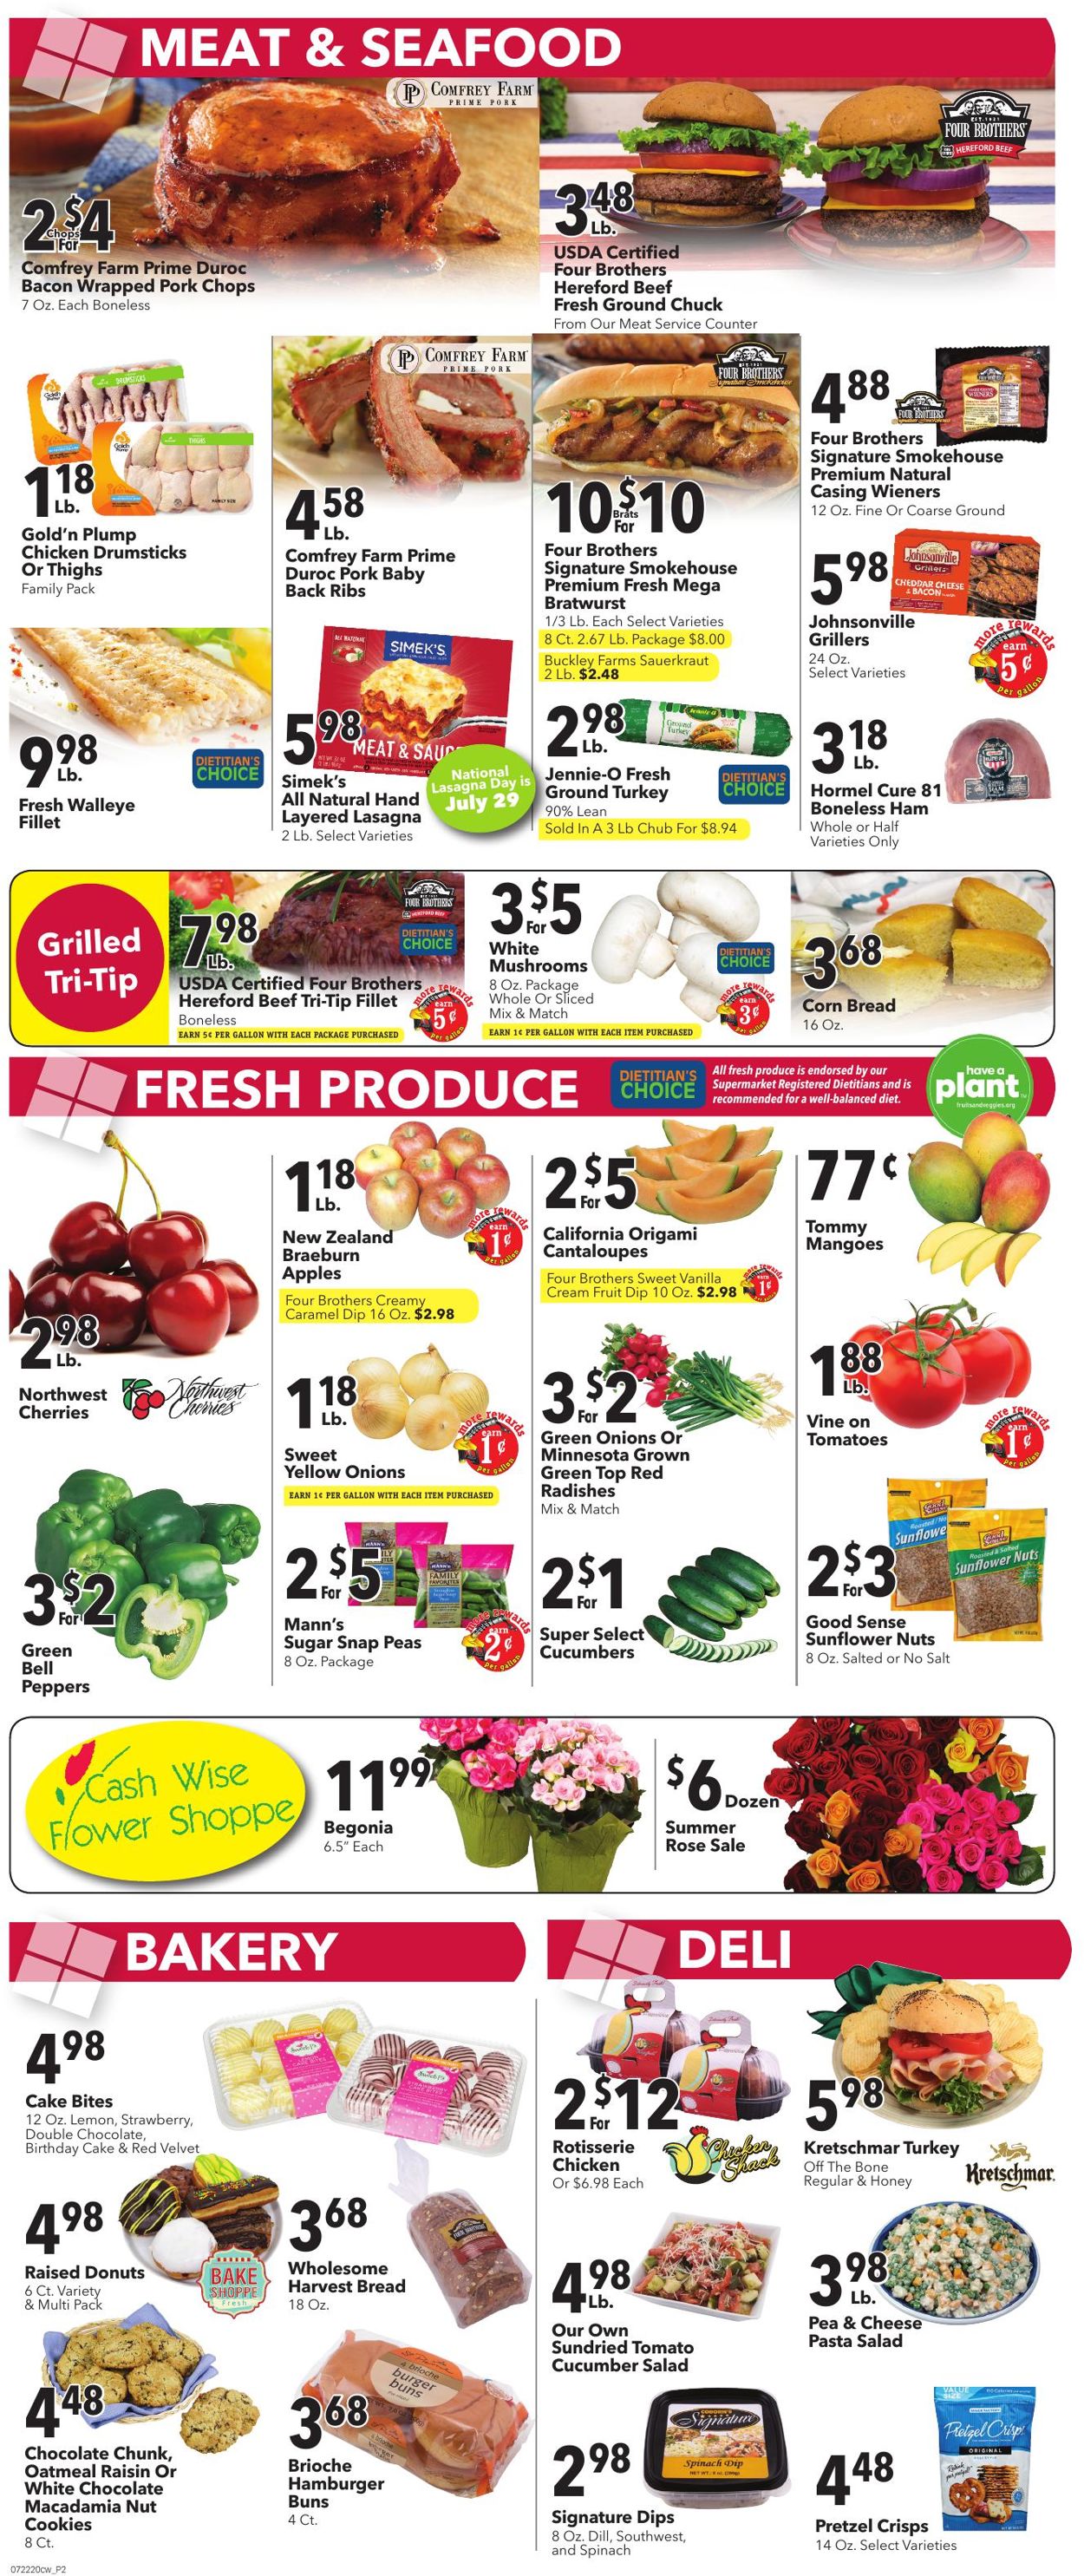 Cash Wise Weekly Ad Circular - valid 07/22-07/28/2020 (Page 2)